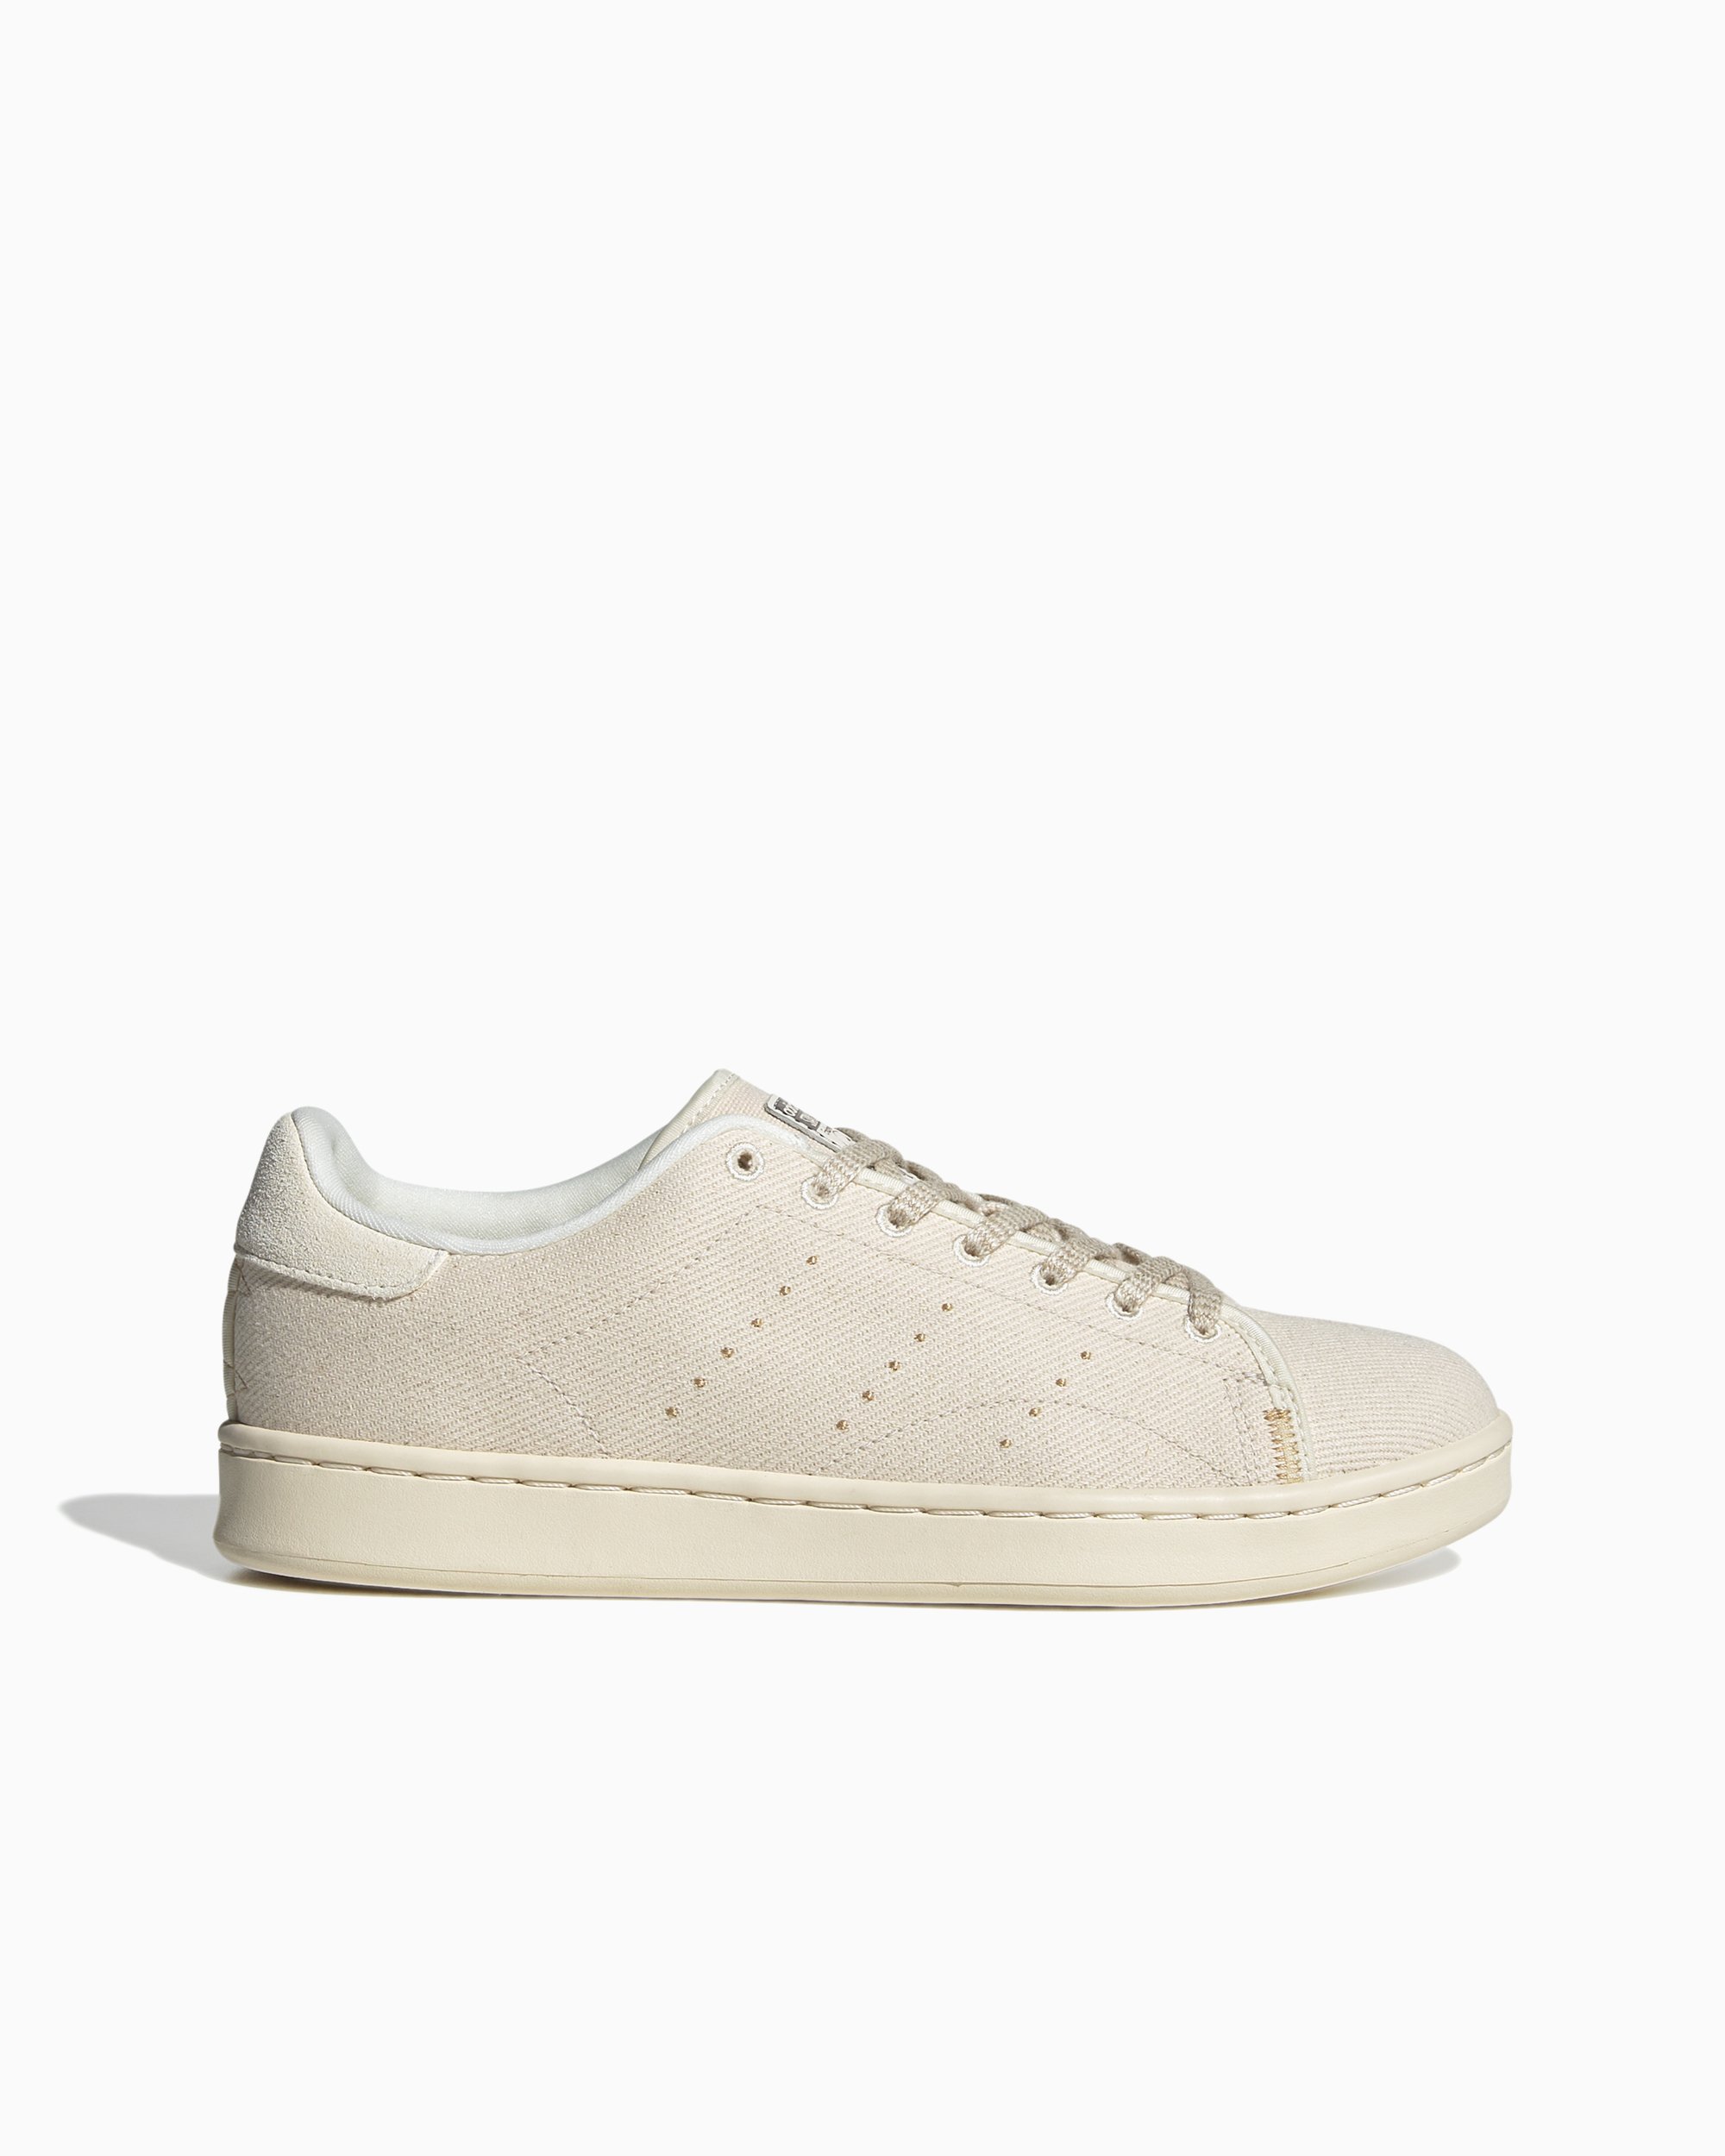 adidas Smith H White GY8793| Buy Online FOOTDISTRICT